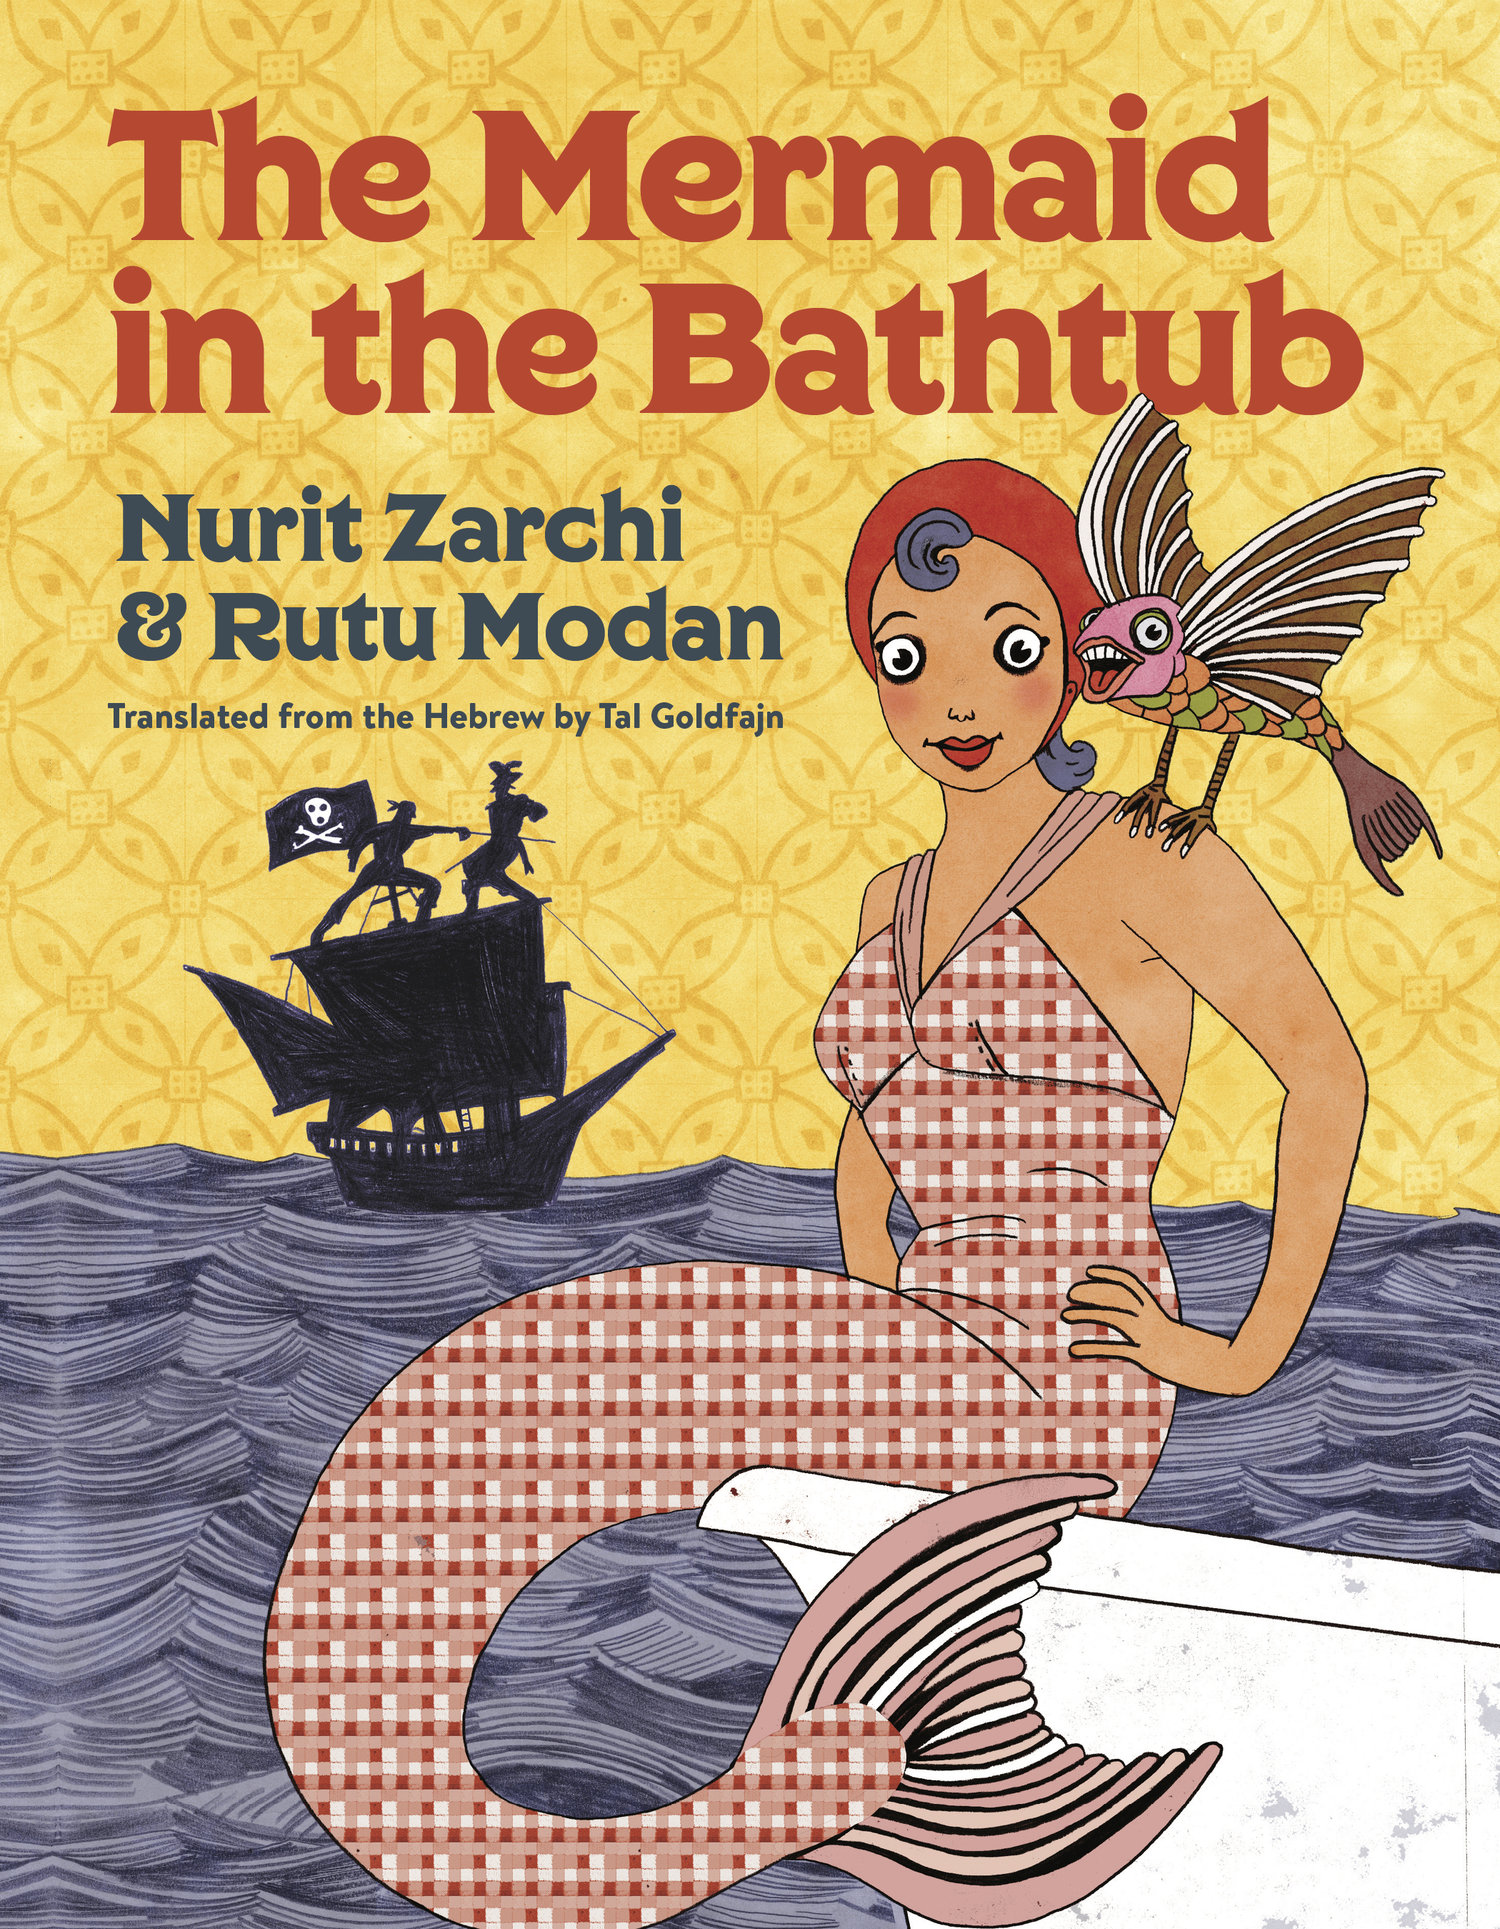 Cover for The Mermaid in the Bathtub featuring an illustration of a mermaid in what appears to be early 1900s swimwear that's a pink checkered pattern intersecting seamlessly with her tail. She is sitting on the edge of a white bathtub on the water and has a red turban on her hair and a fish-bird hybrid animal on her shoulder while the silhouette of a pirate ship with two pirates sword-fighting on top of it can be seen in the background. Above the water is a textured and patterned yellow background.